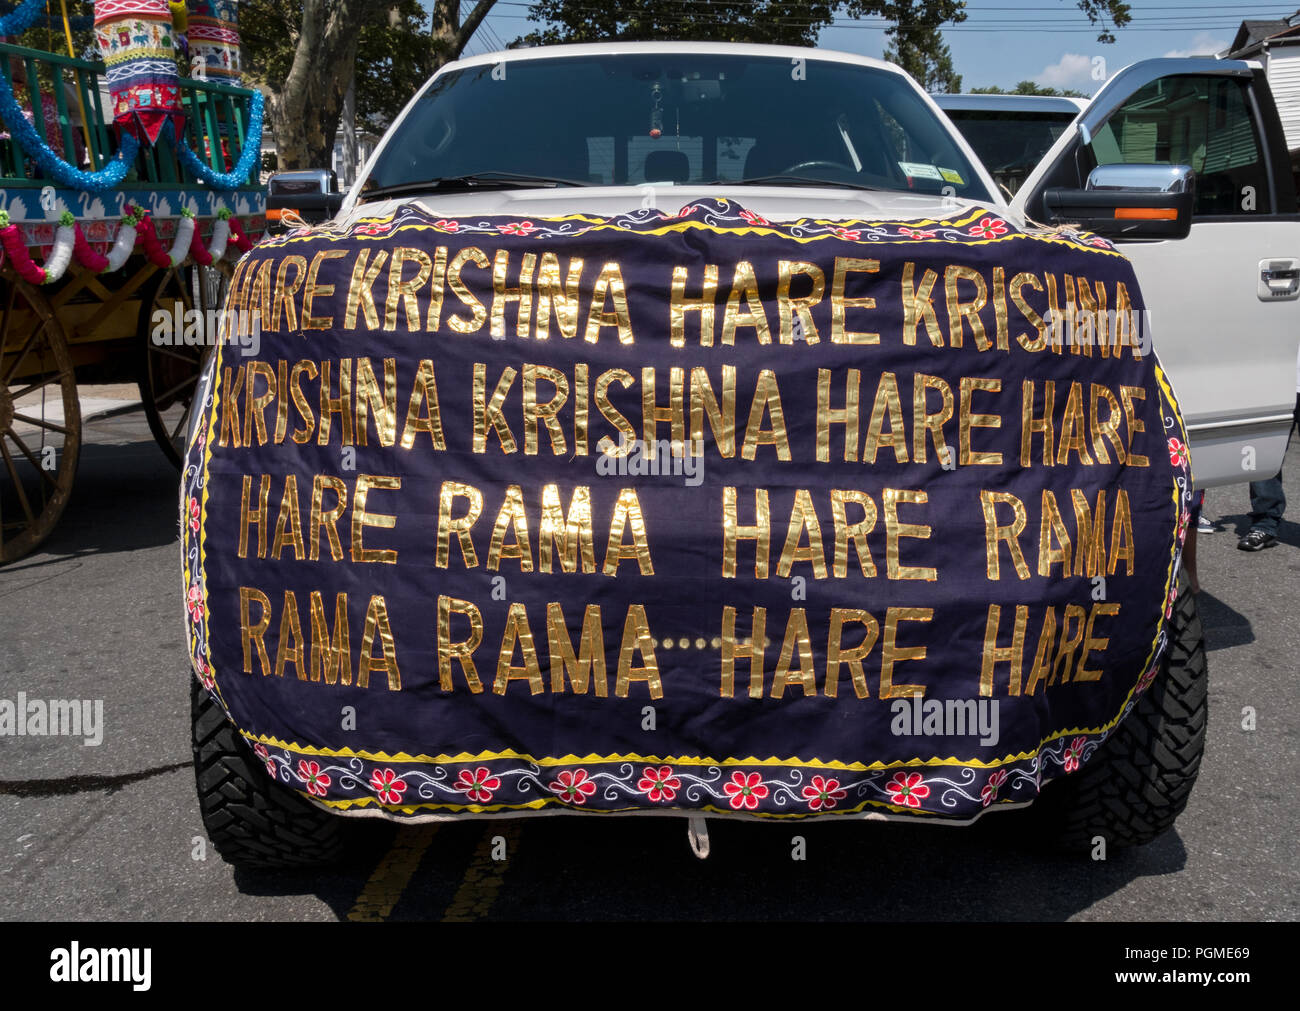 An SUV at the Queens, New York Rathayatra Parade with the 16 word Hare Krishna mantra on a banner. Stock Photo